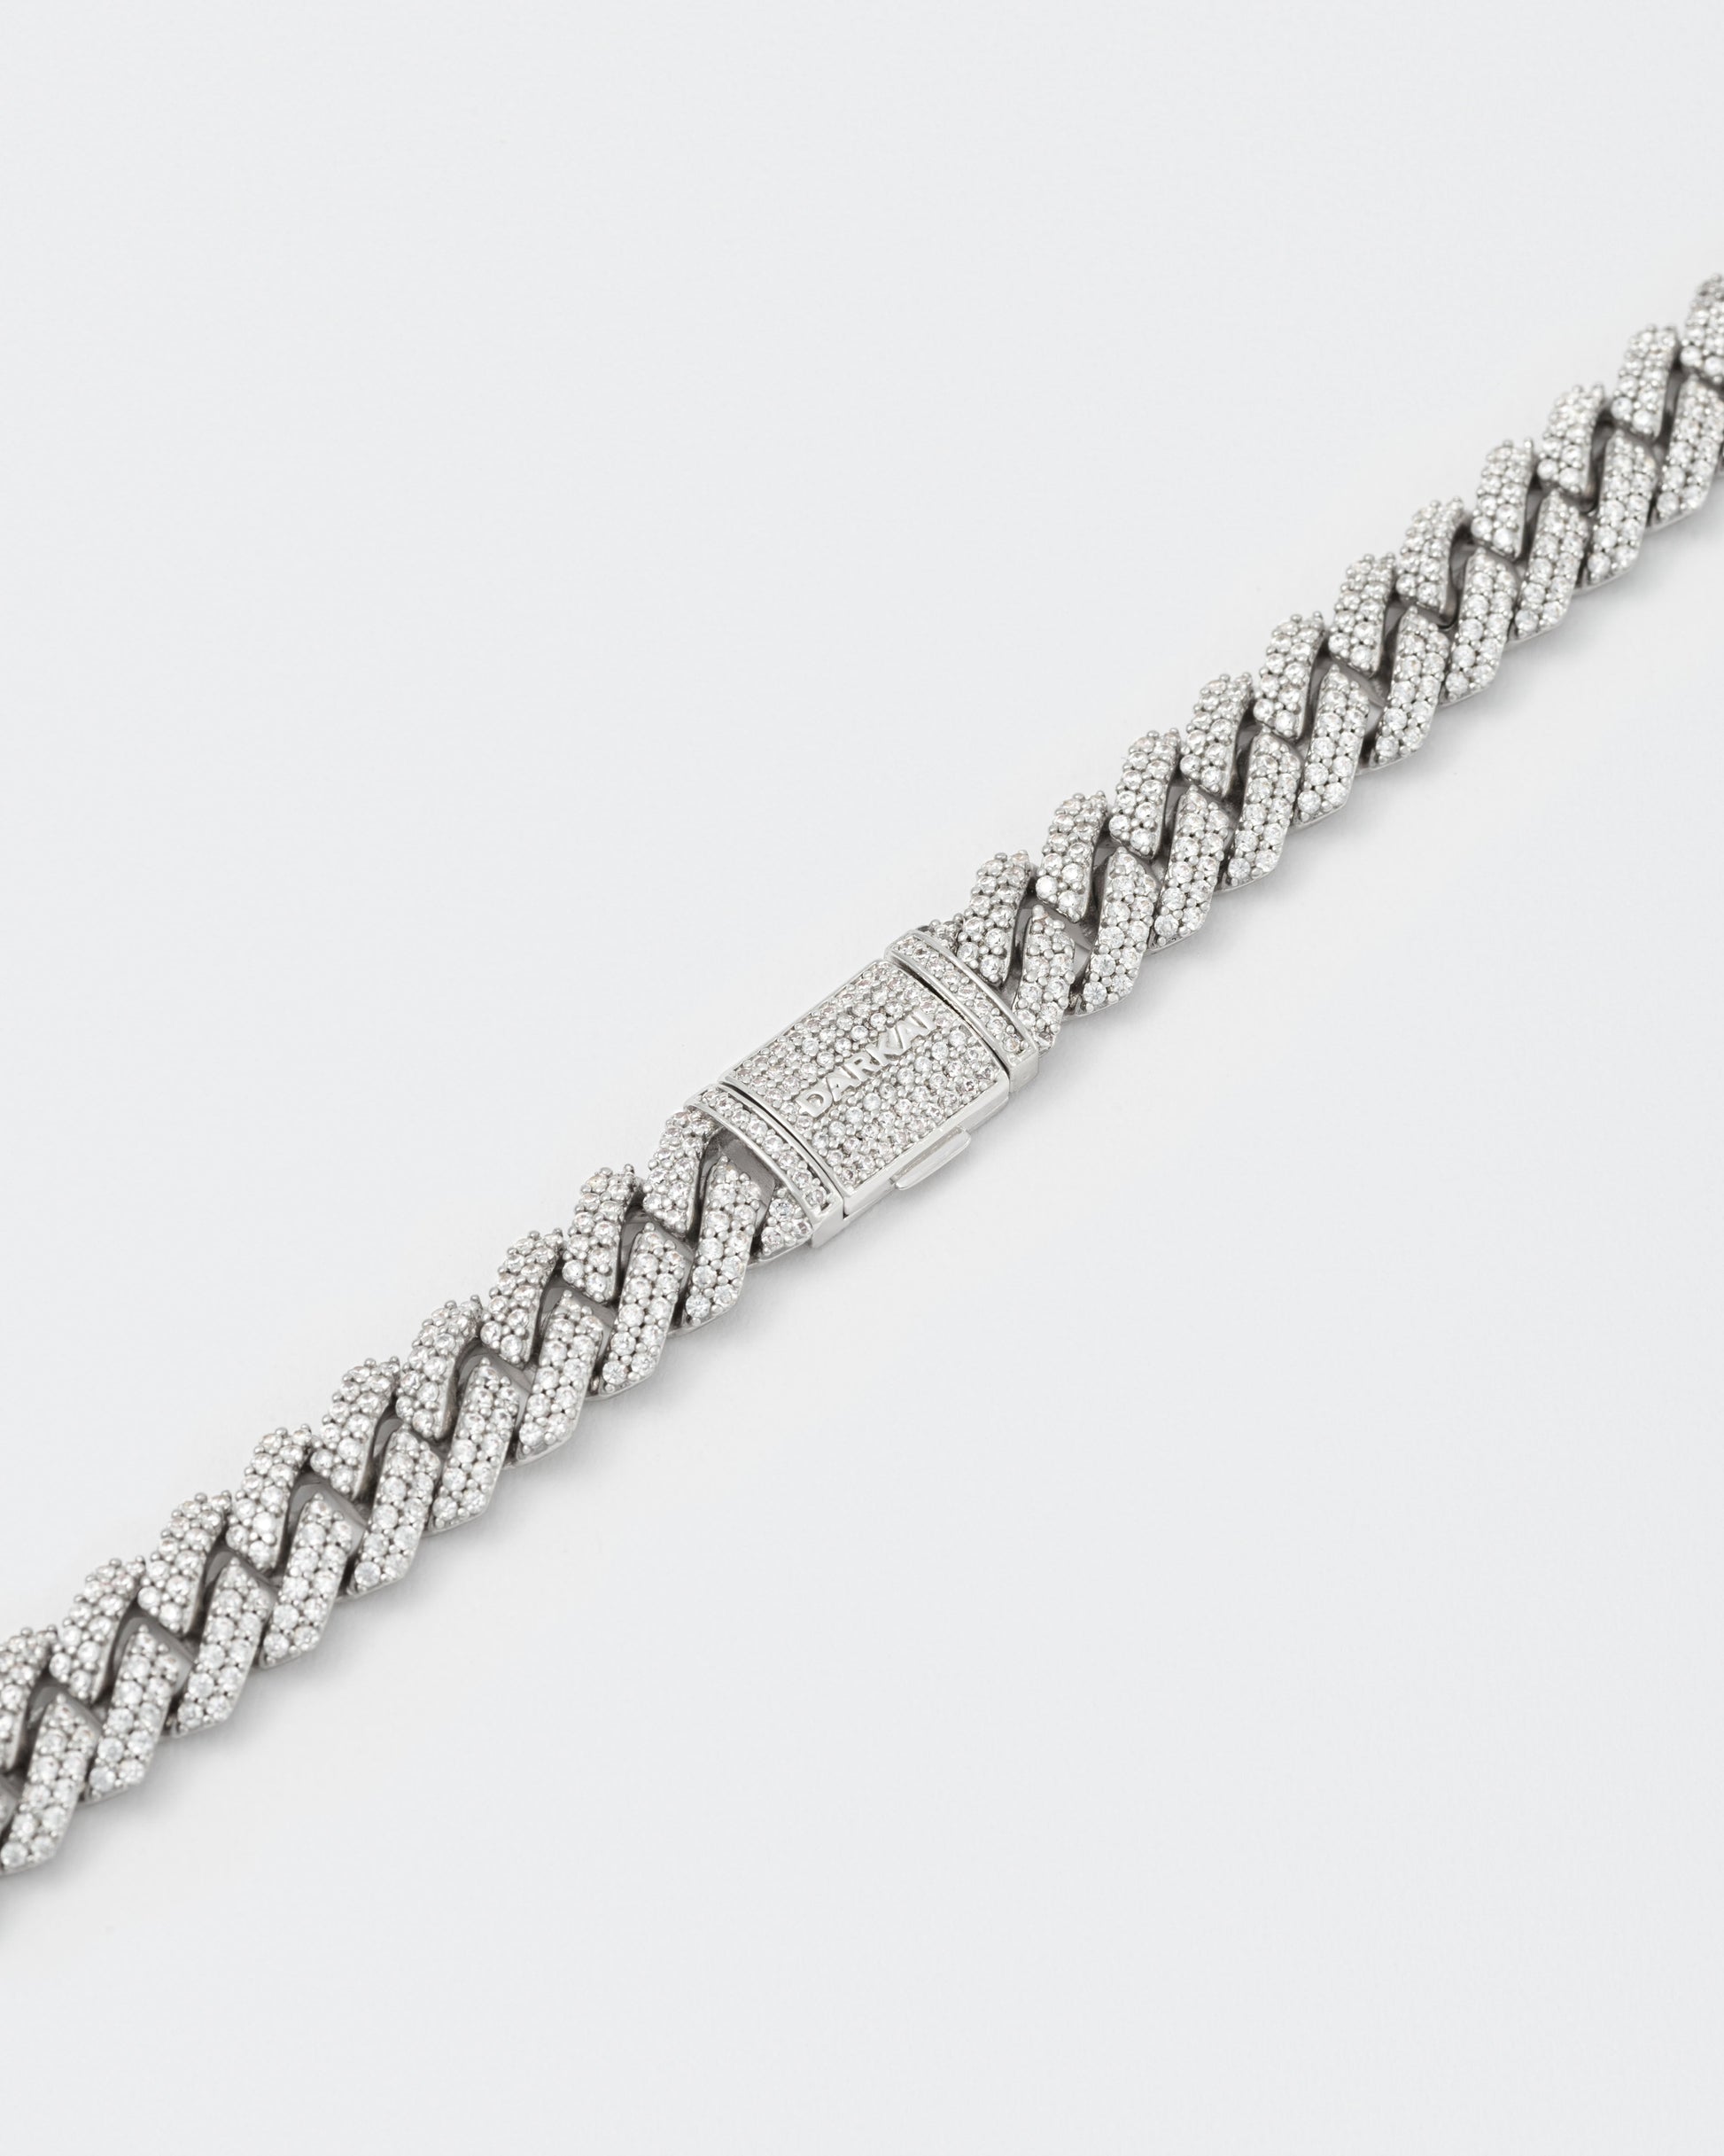 detail of 8k white gold coated mini prong chain bracelet with hand-set micropavé stones in white